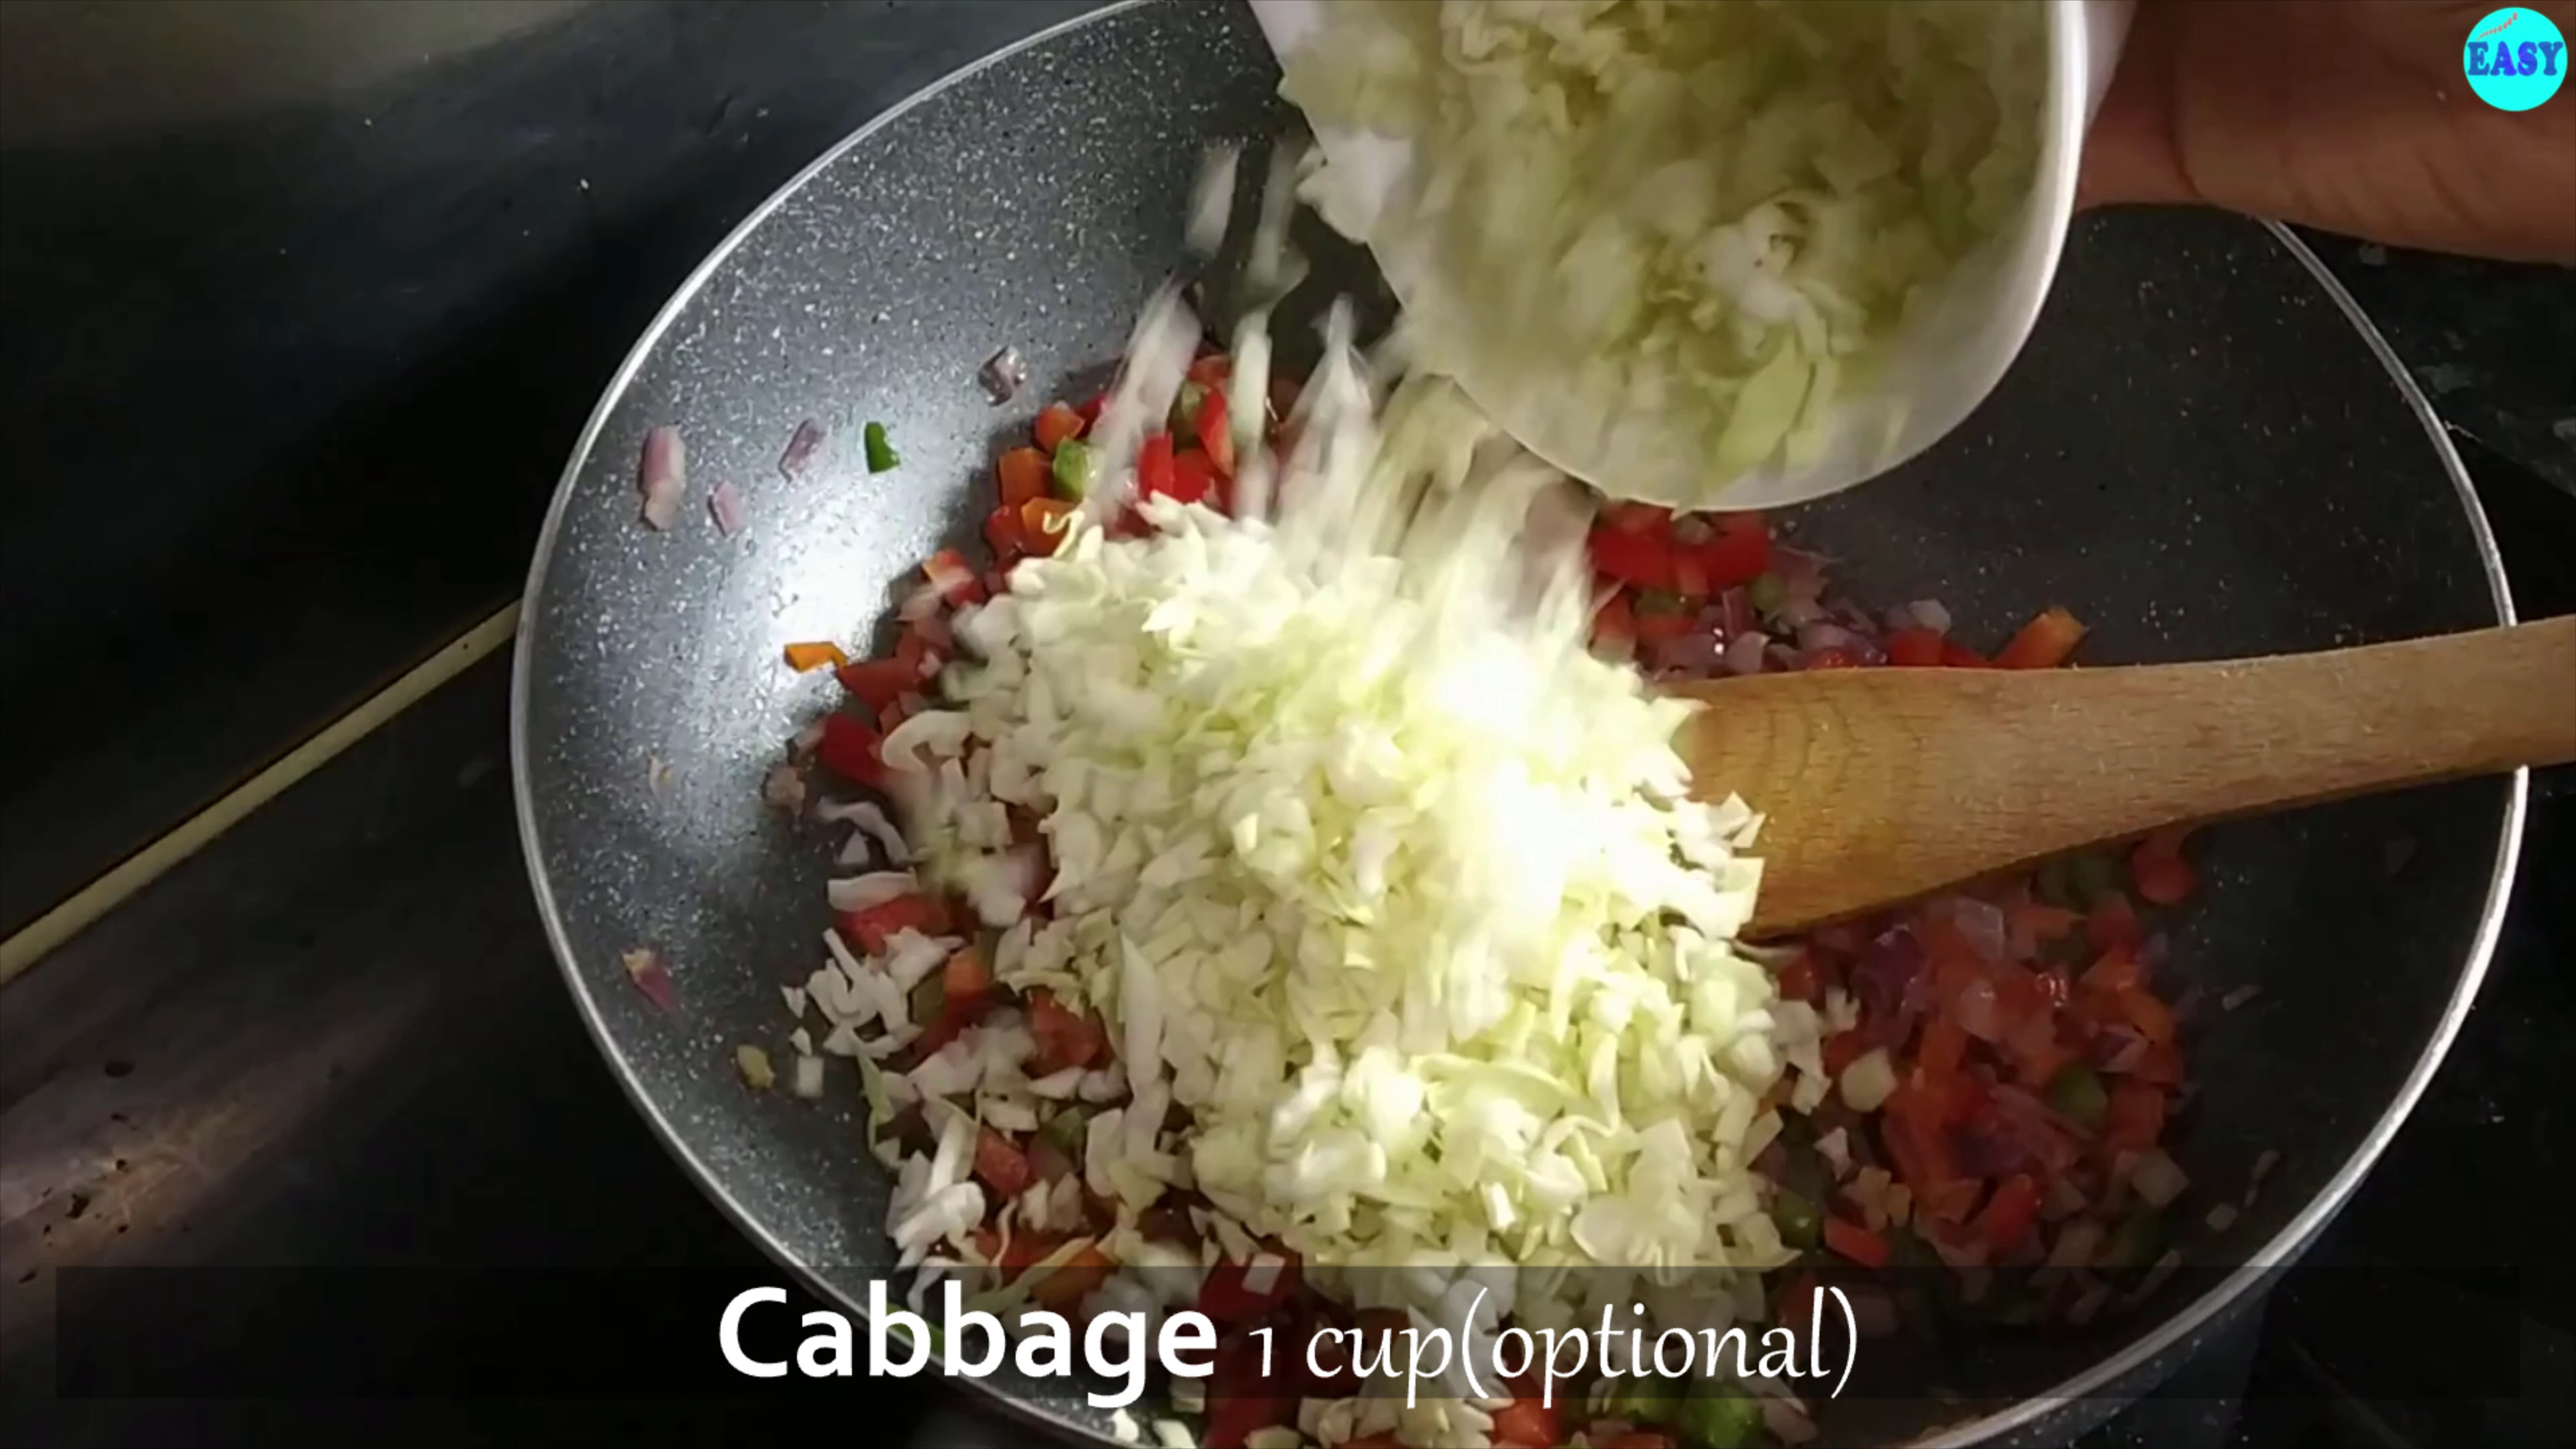 Step 6 - Add chopped cabbage and cook it on high flame for 2-3 minutes. Veggies should be half done not fully cooked.